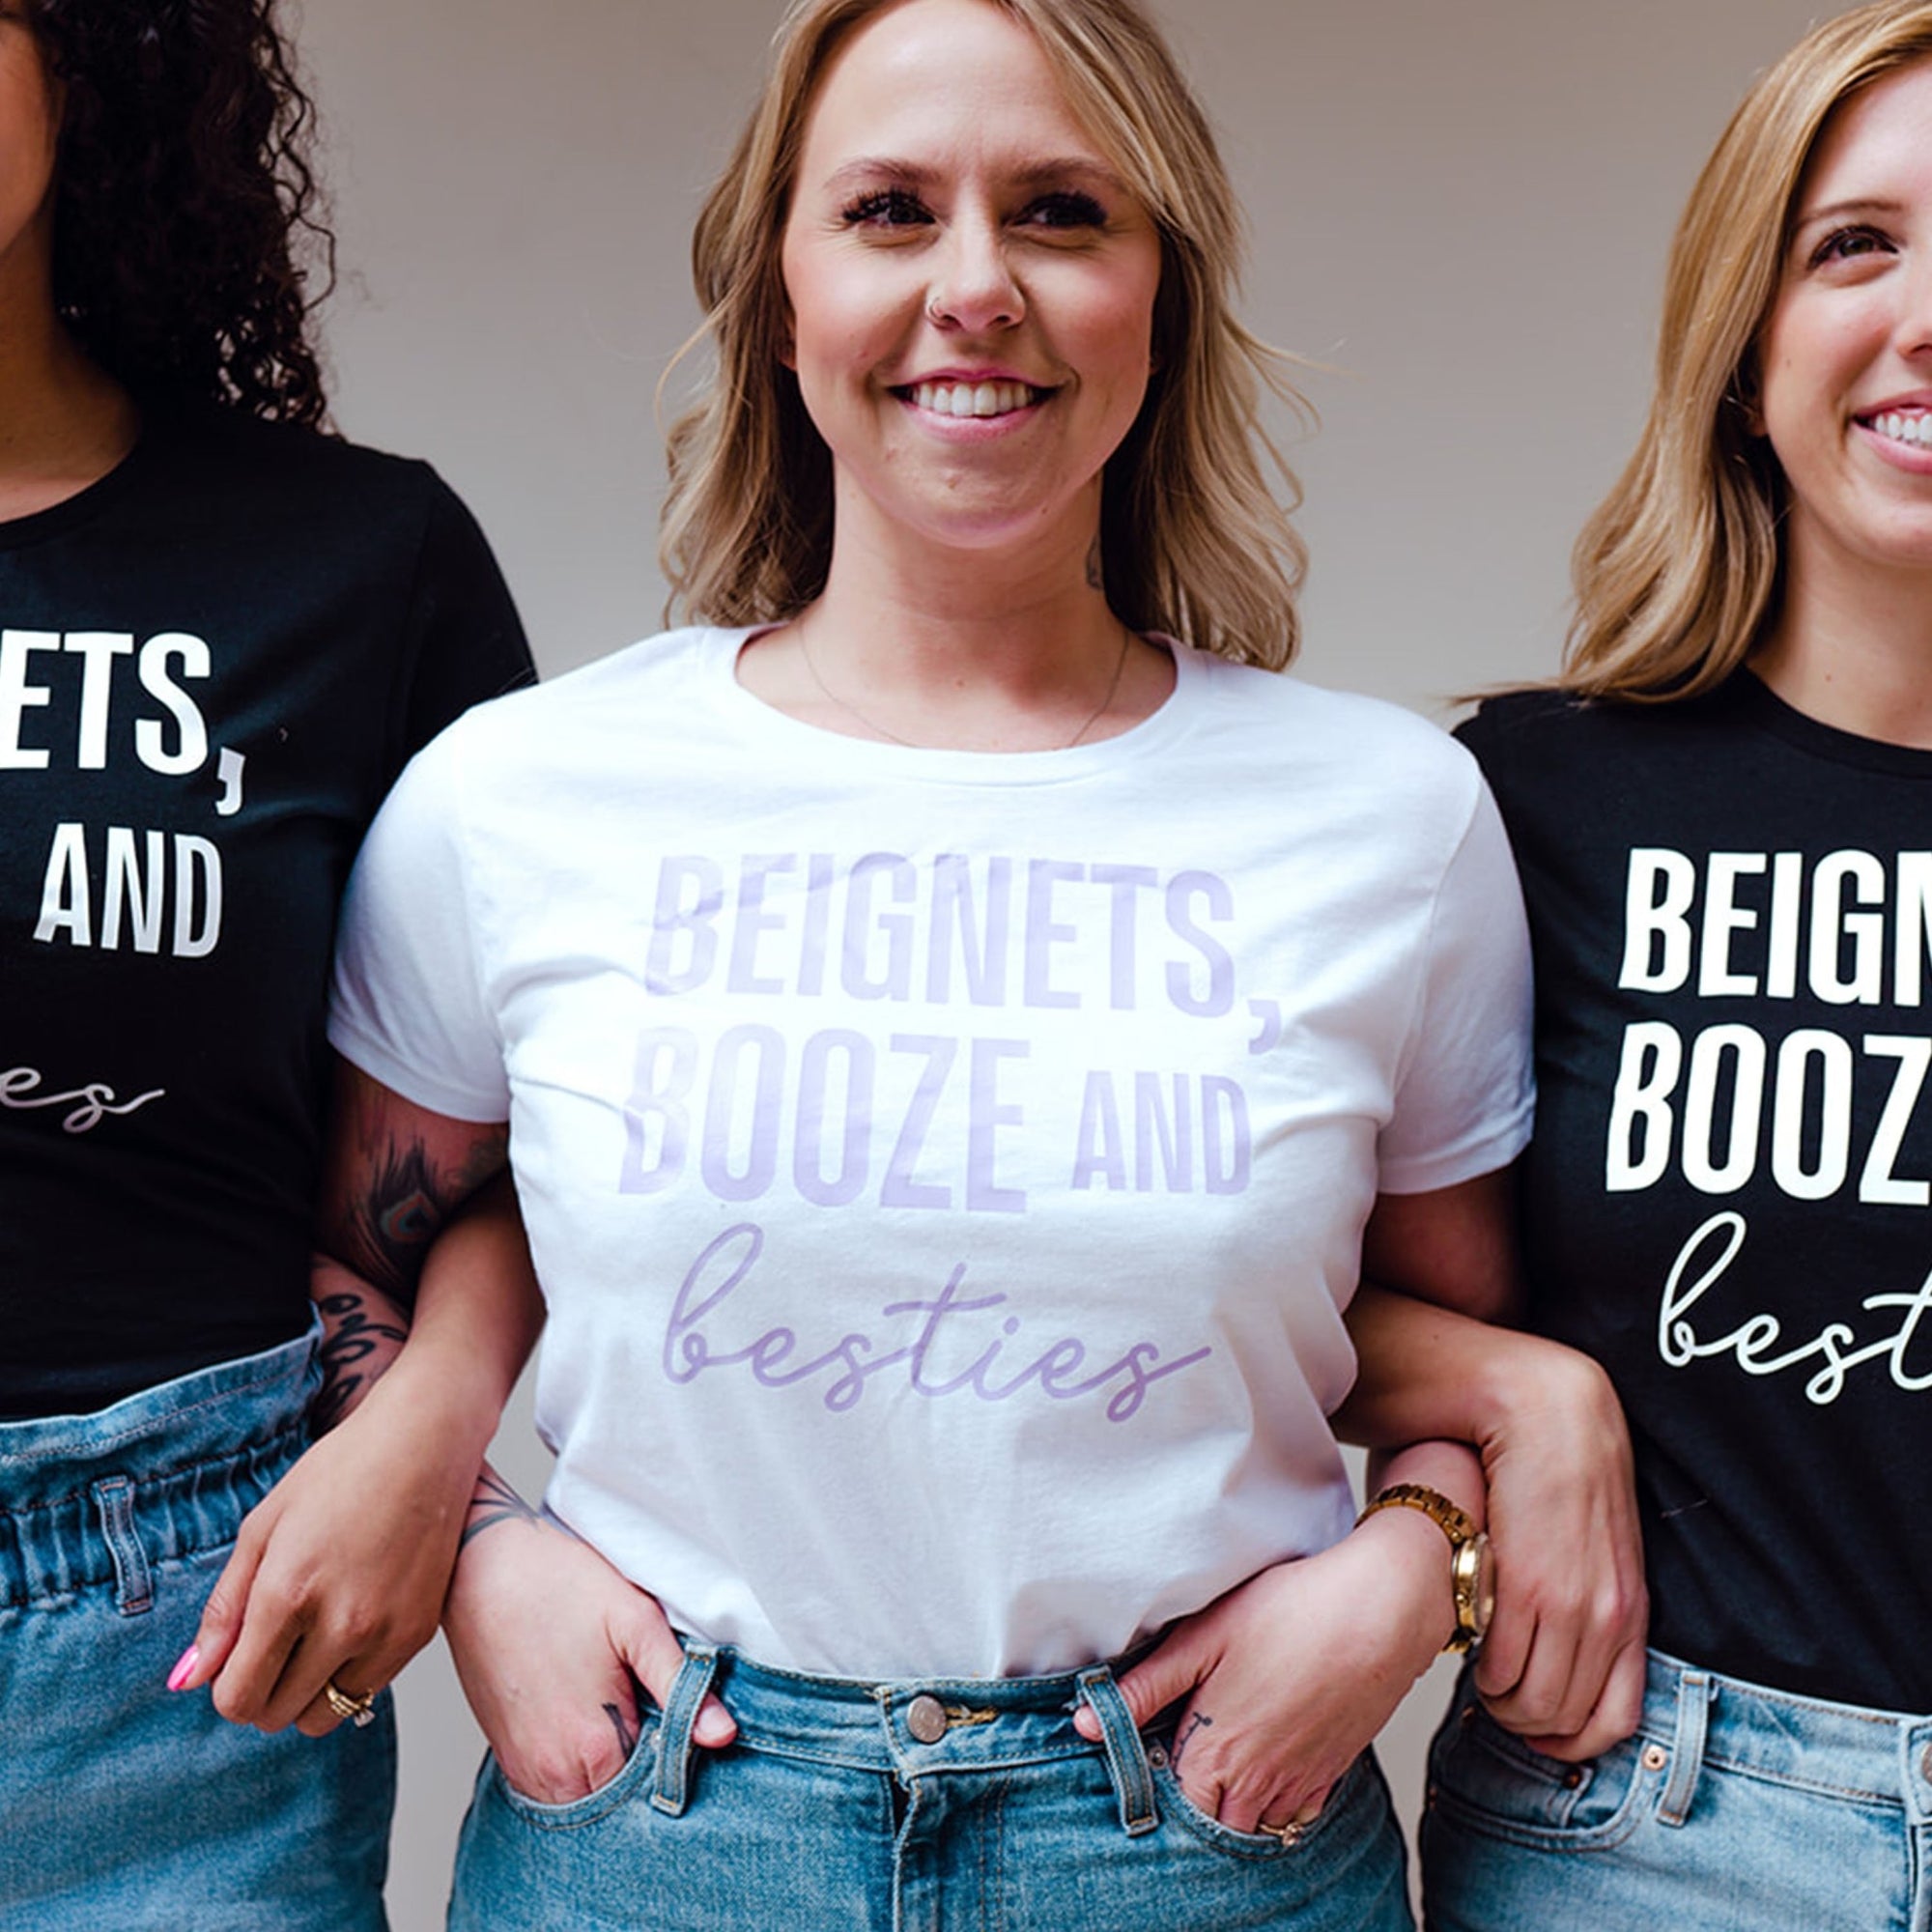 A black and a white t shirt are customized with a purple "Beignets, Booze and Besties" designs